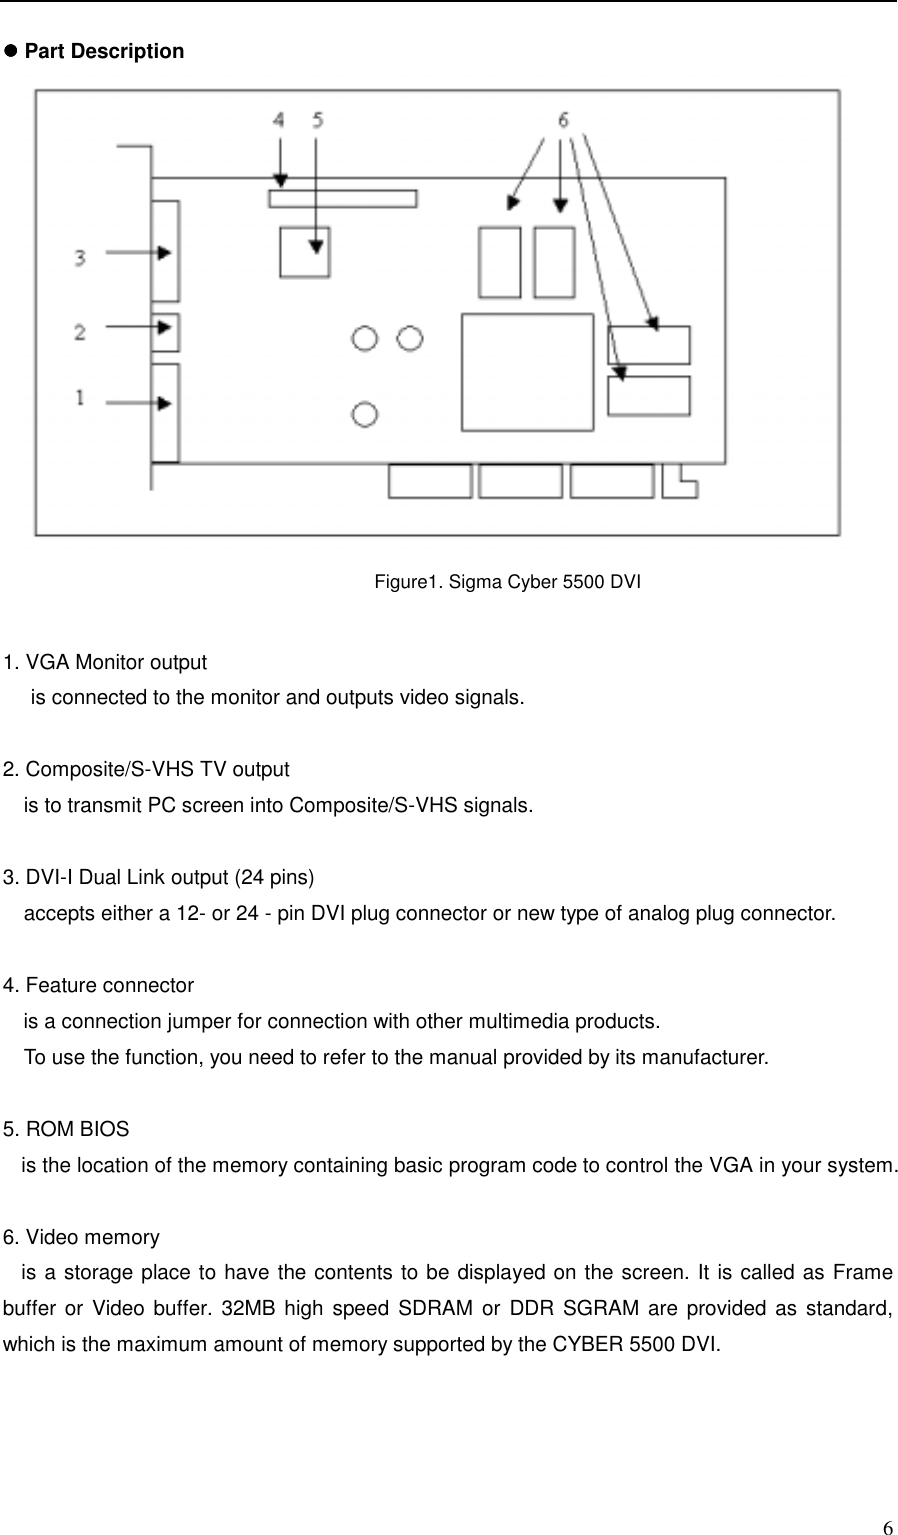     6 !!!! Part Description                                            Figure1. Sigma Cyber 5500 DVI   1. VGA Monitor output is connected to the monitor and outputs video signals.  2. Composite/S-VHS TV output     is to transmit PC screen into Composite/S-VHS signals.  3. DVI-I Dual Link output (24 pins)     accepts either a 12- or 24 - pin DVI plug connector or new type of analog plug connector.  4. Feature connector   is a connection jumper for connection with other multimedia products.     To use the function, you need to refer to the manual provided by its manufacturer.  5. ROM BIOS is the location of the memory containing basic program code to control the VGA in your system.    6. Video memory is a storage place to have the contents to be displayed on the screen. It is called as Frame buffer or Video buffer. 32MB high speed SDRAM or DDR SGRAM are provided as standard, which is the maximum amount of memory supported by the CYBER 5500 DVI.                   